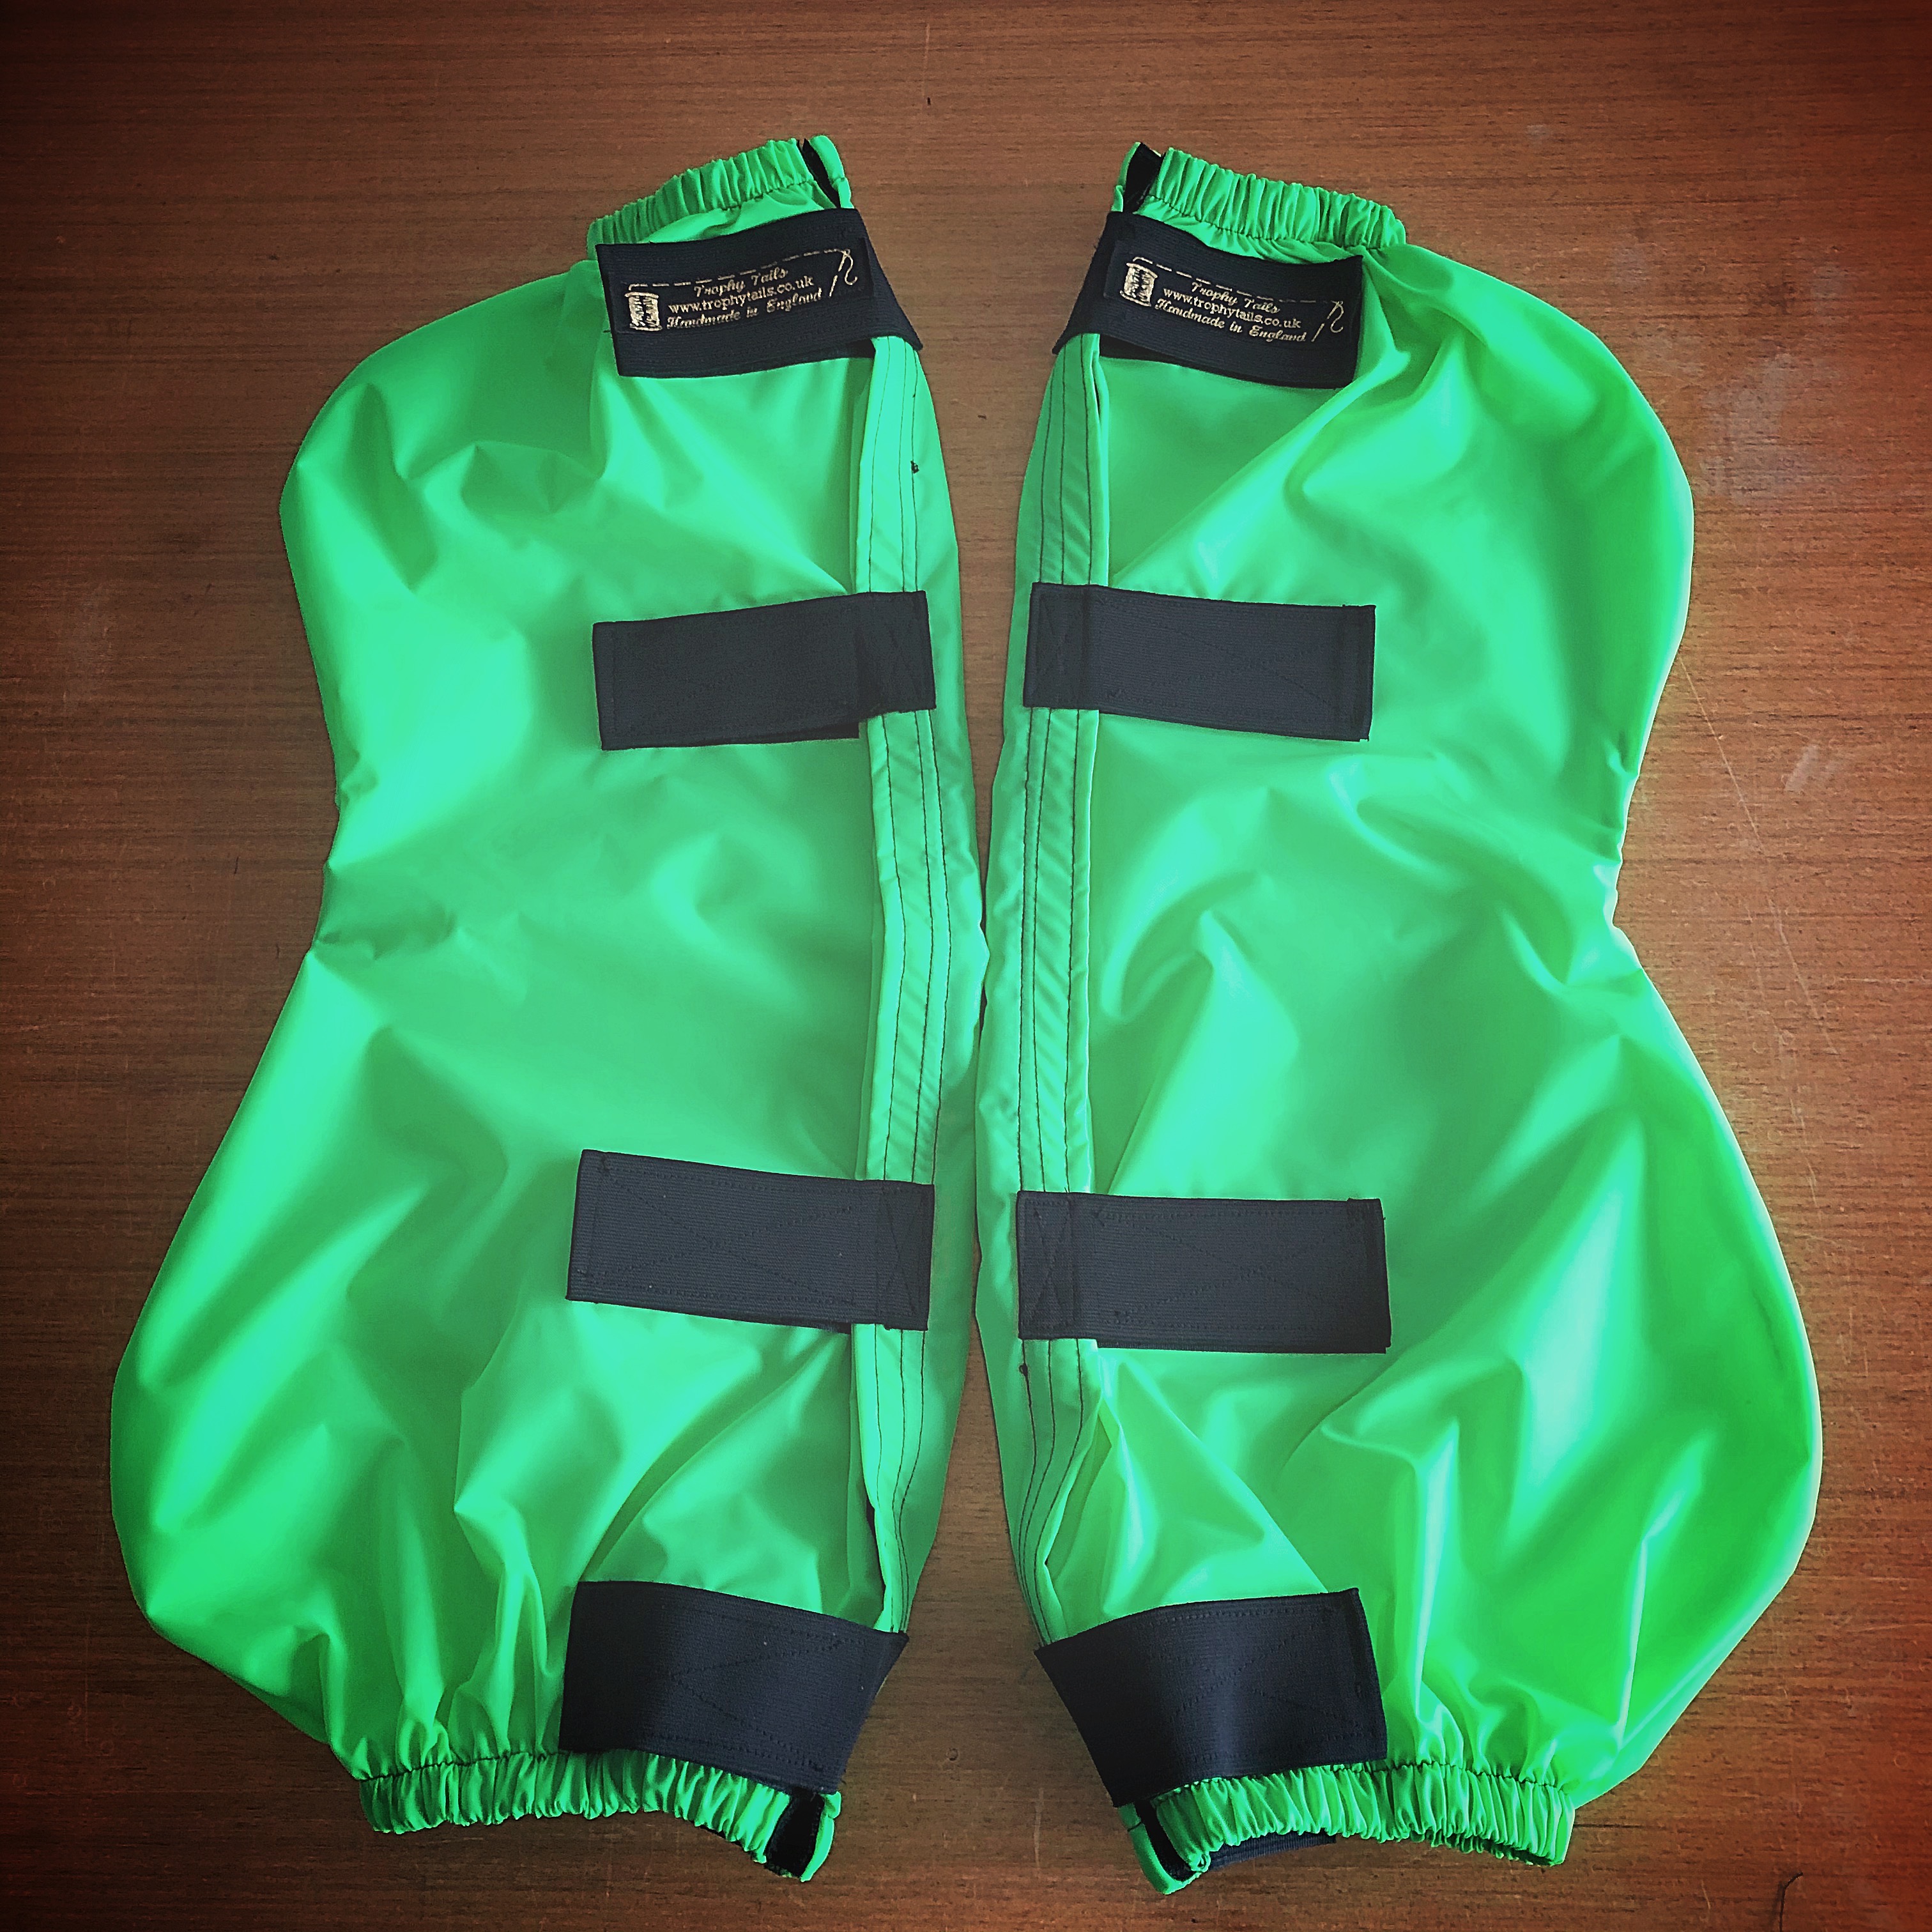 Waterproof Feather Boots set of 2 backs - Fluorescent Green